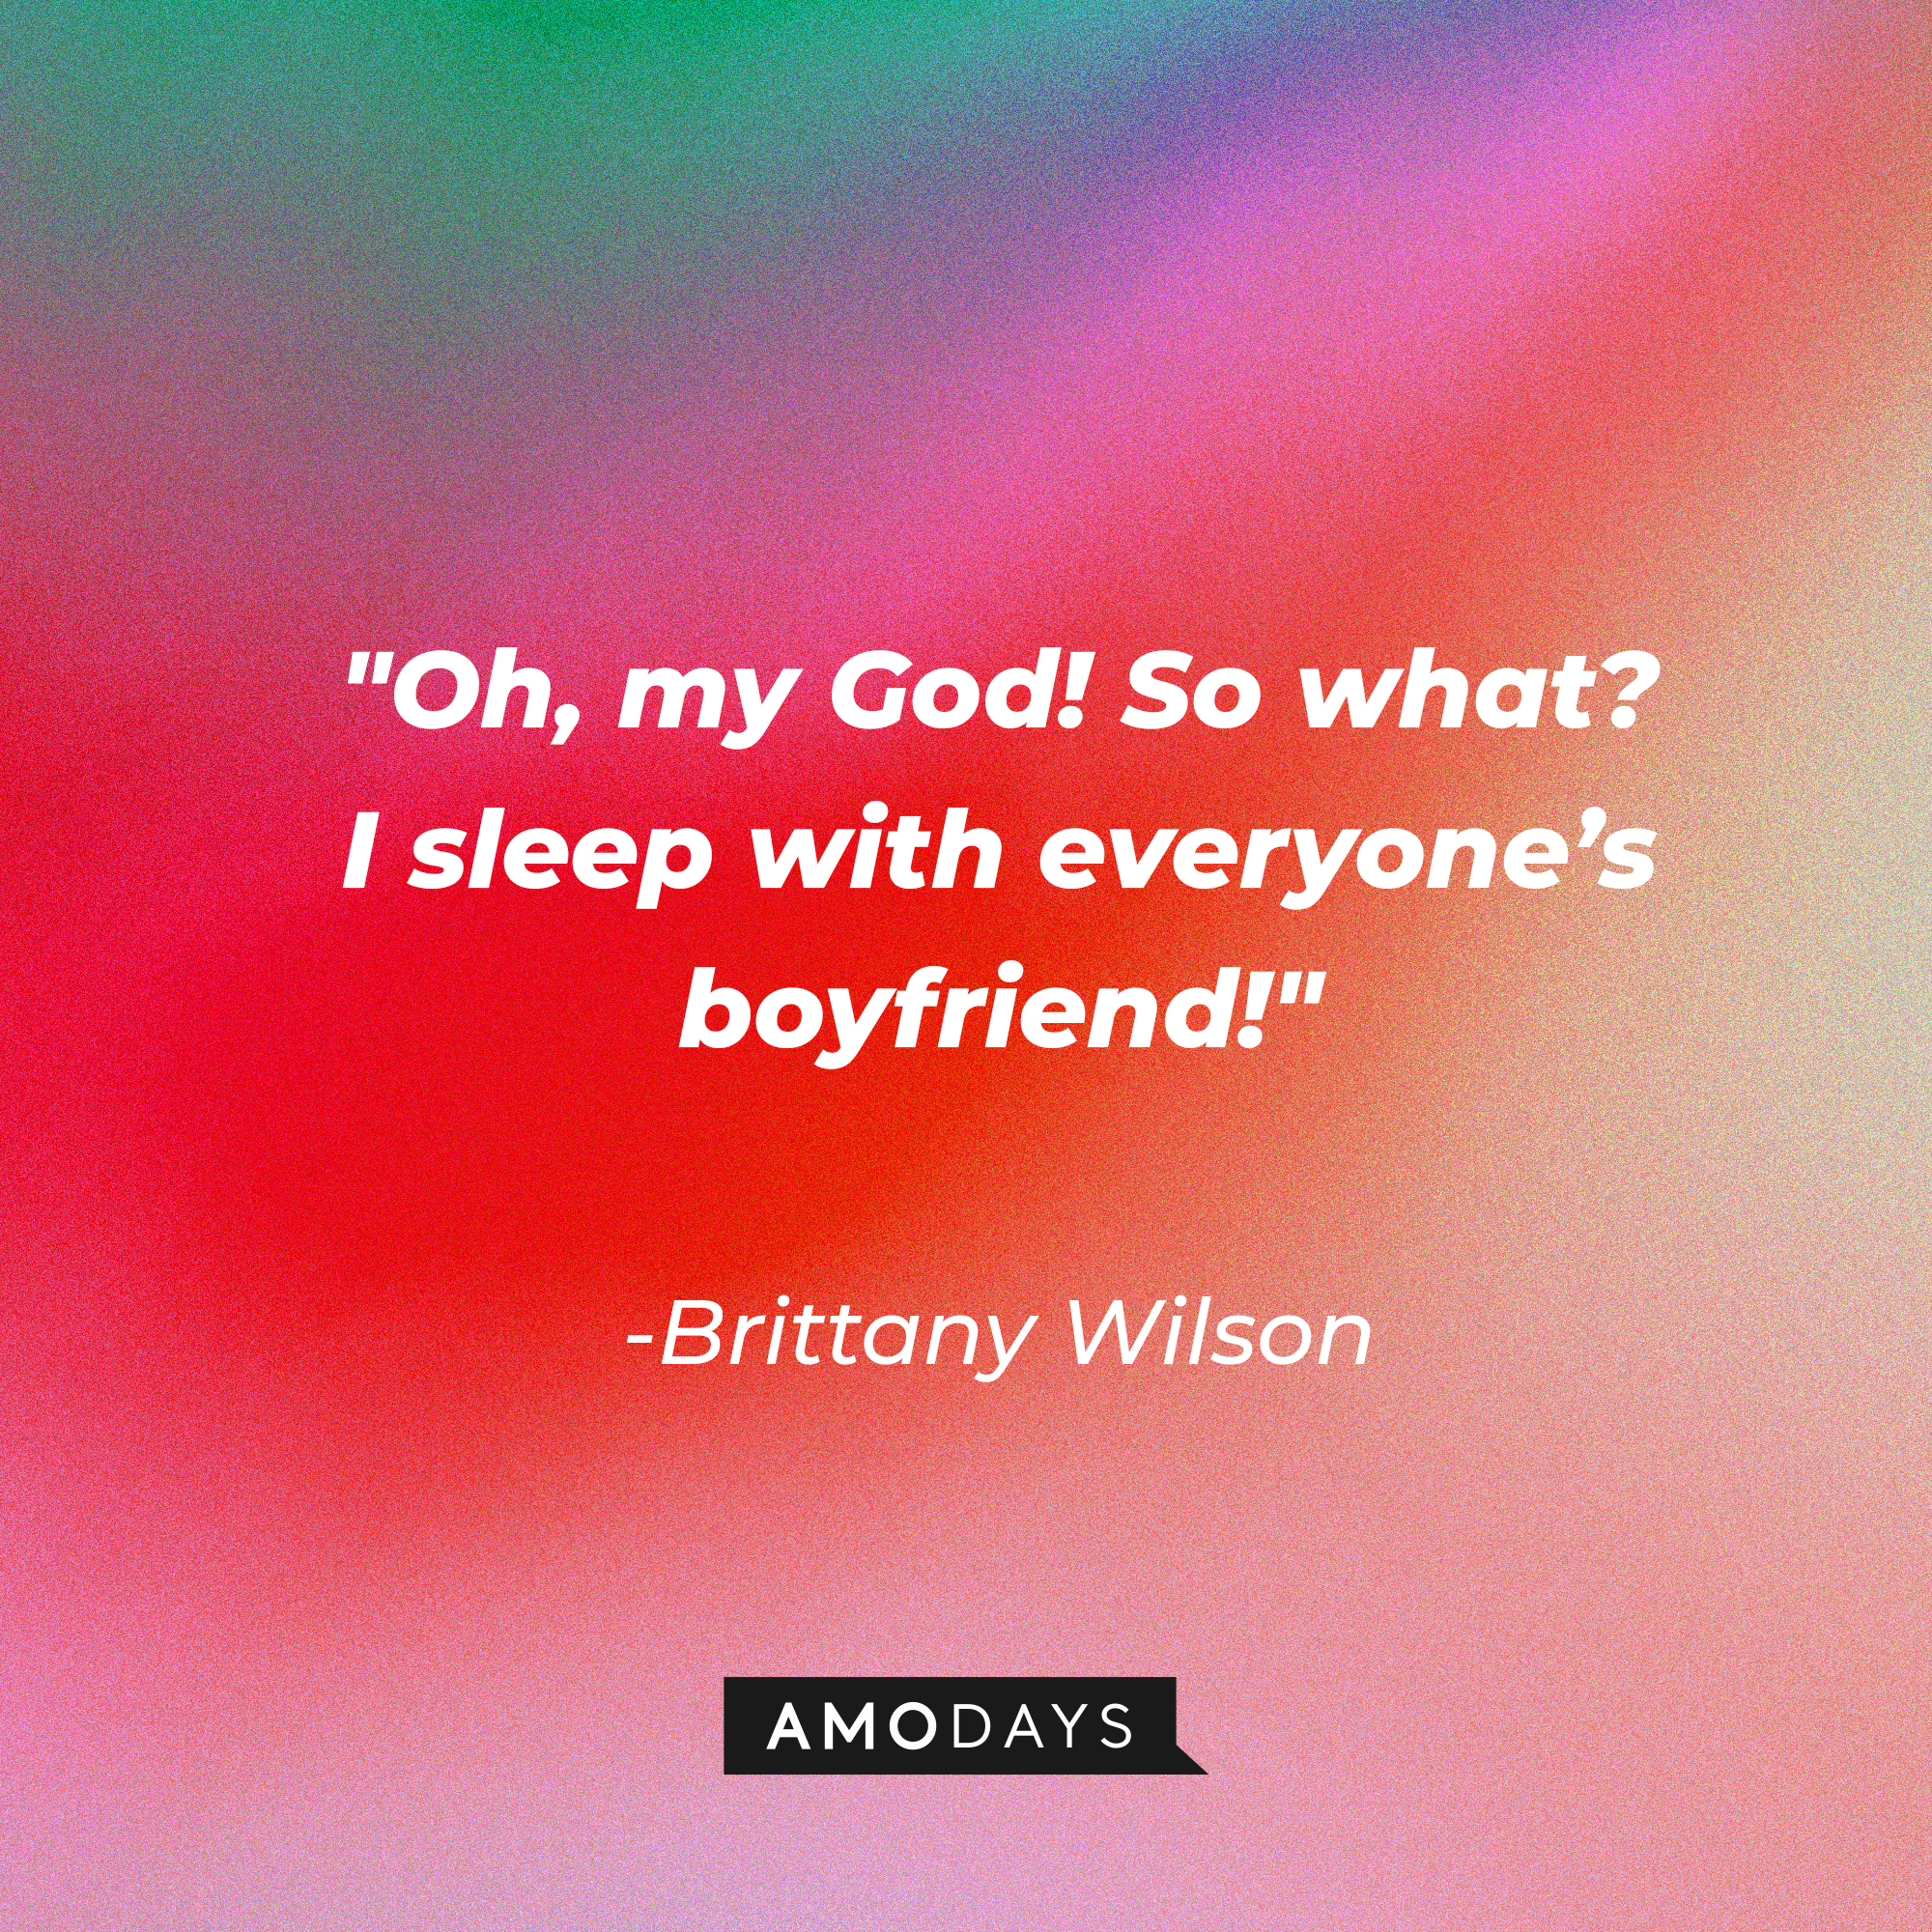 Brittany Wilson's quote: "Oh, my God! So what? I sleep with everyone's boyfriend!" | Source: Amodays